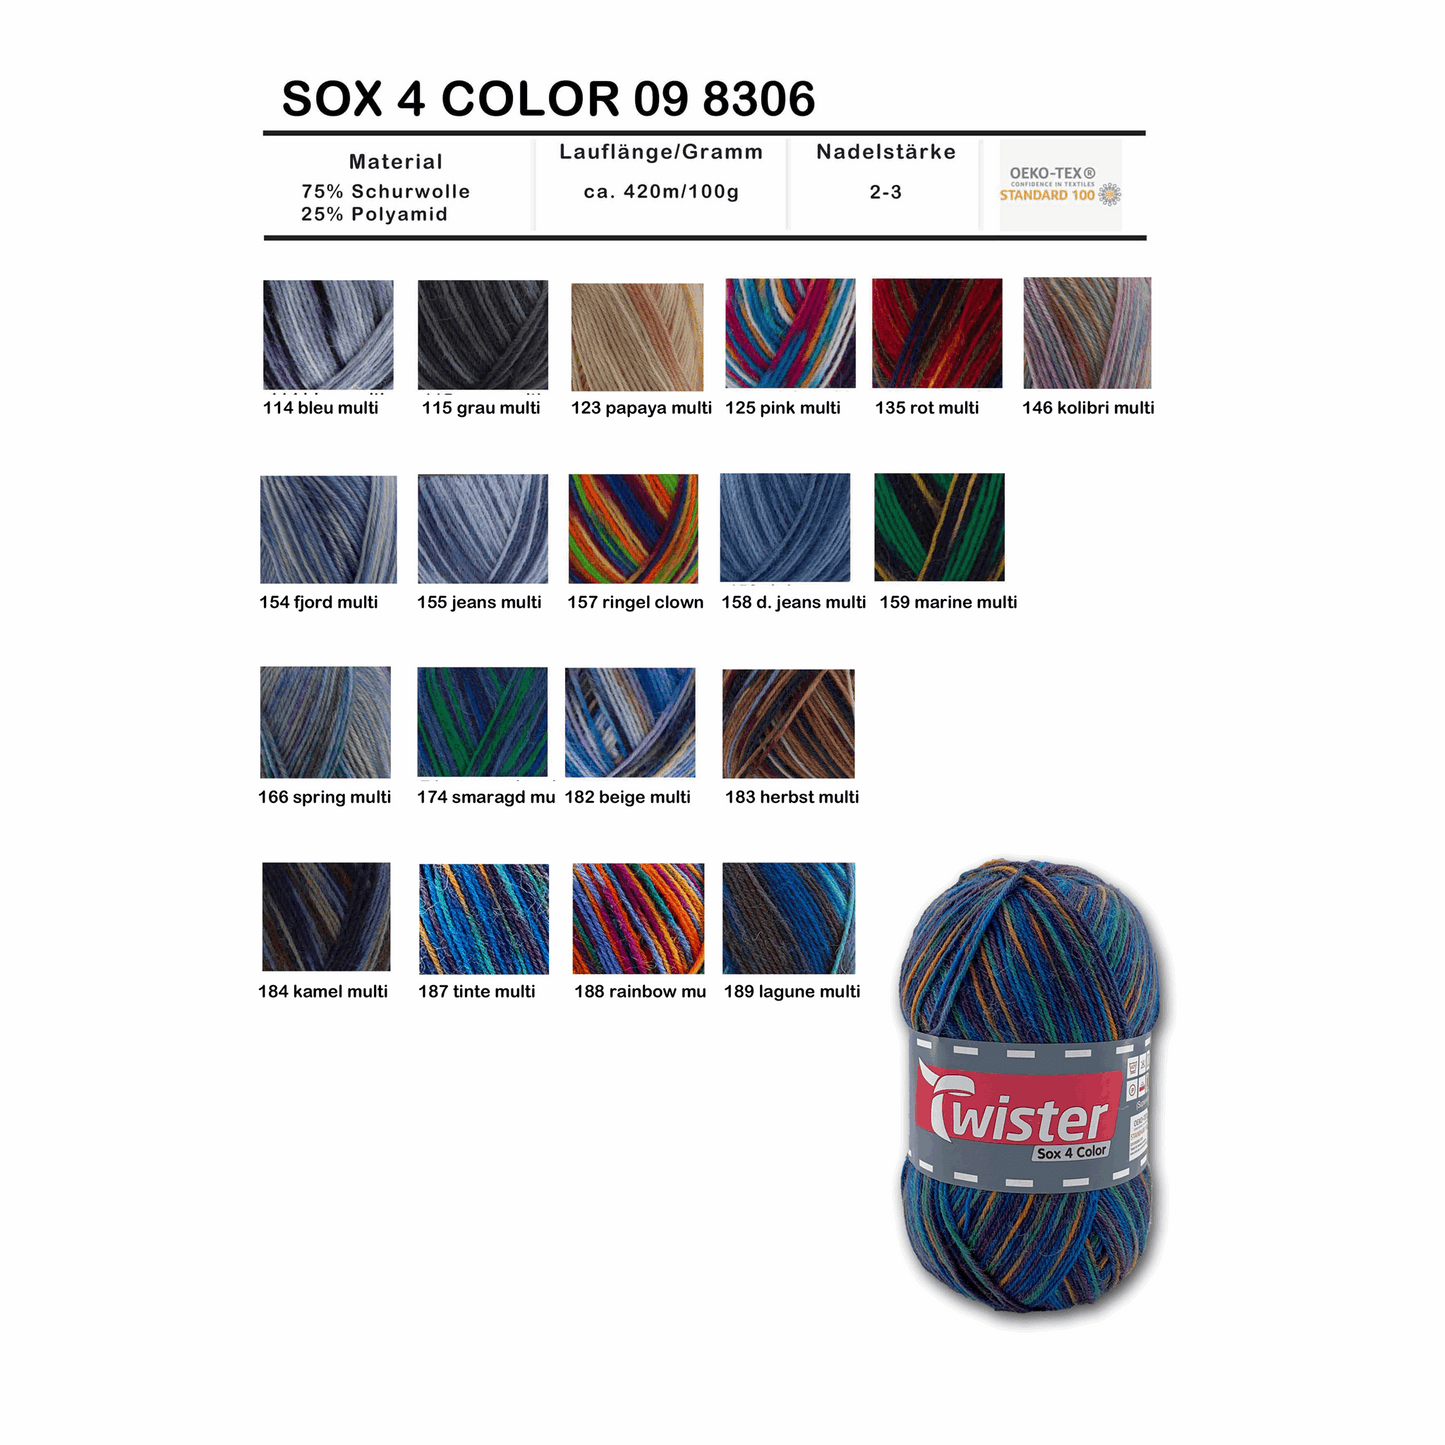 Twister Sox4 Color superwash, herbst multi, 98306, Farbe 183